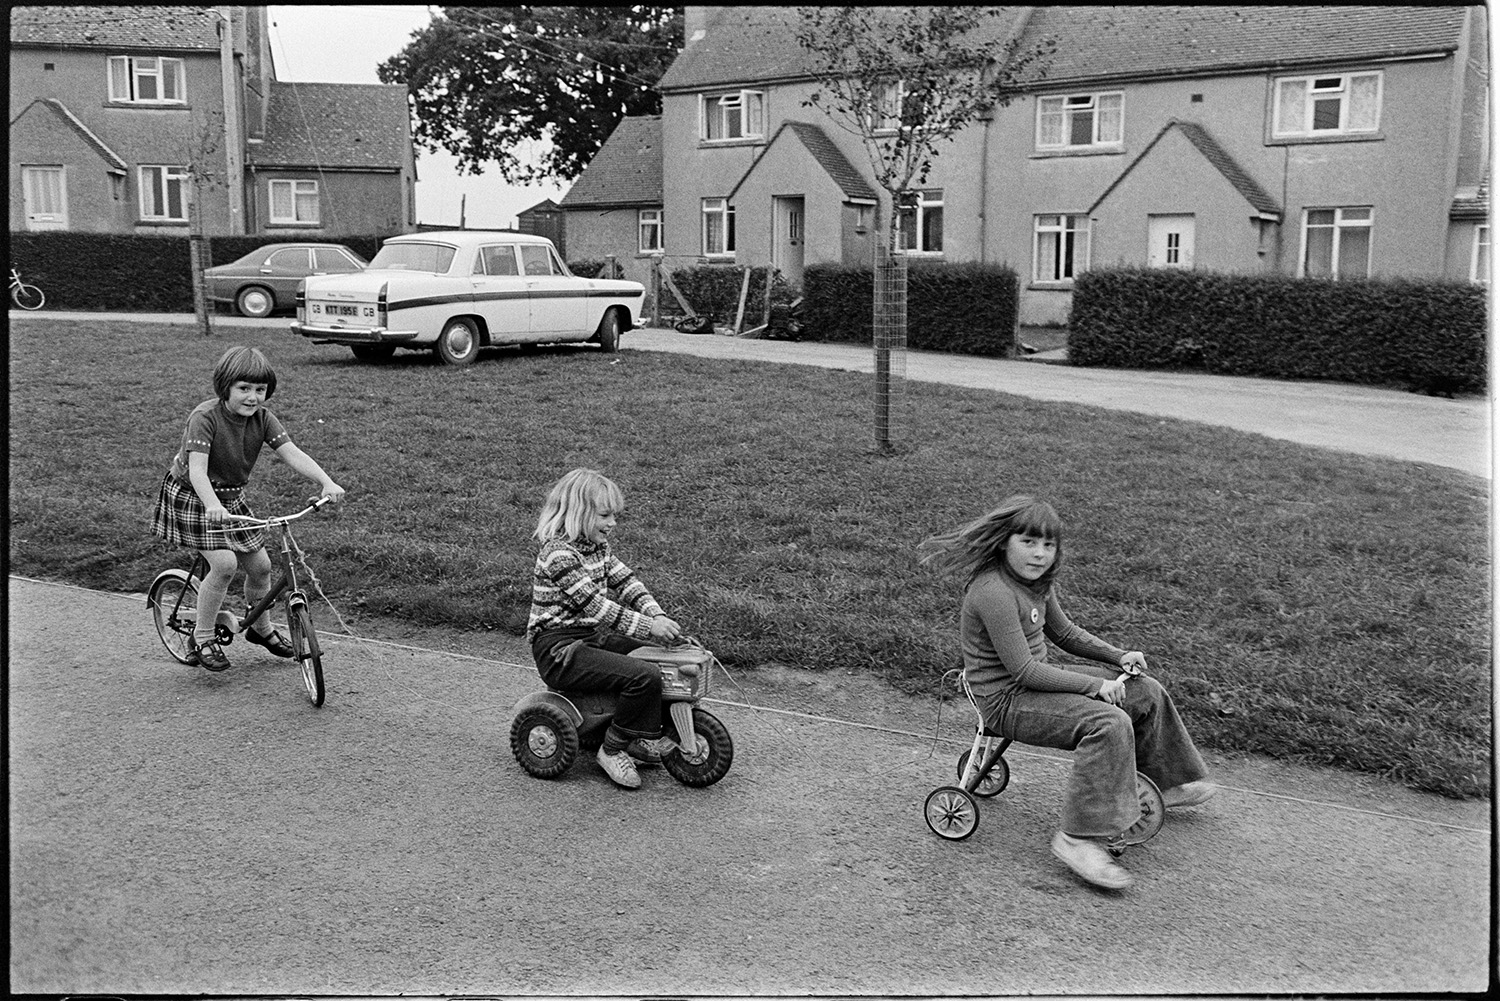 Children, girls on bicycle and tricycle on council estate. 
[Three girls riding tricycles and a bicycle on a street in front of houses in Merton.]